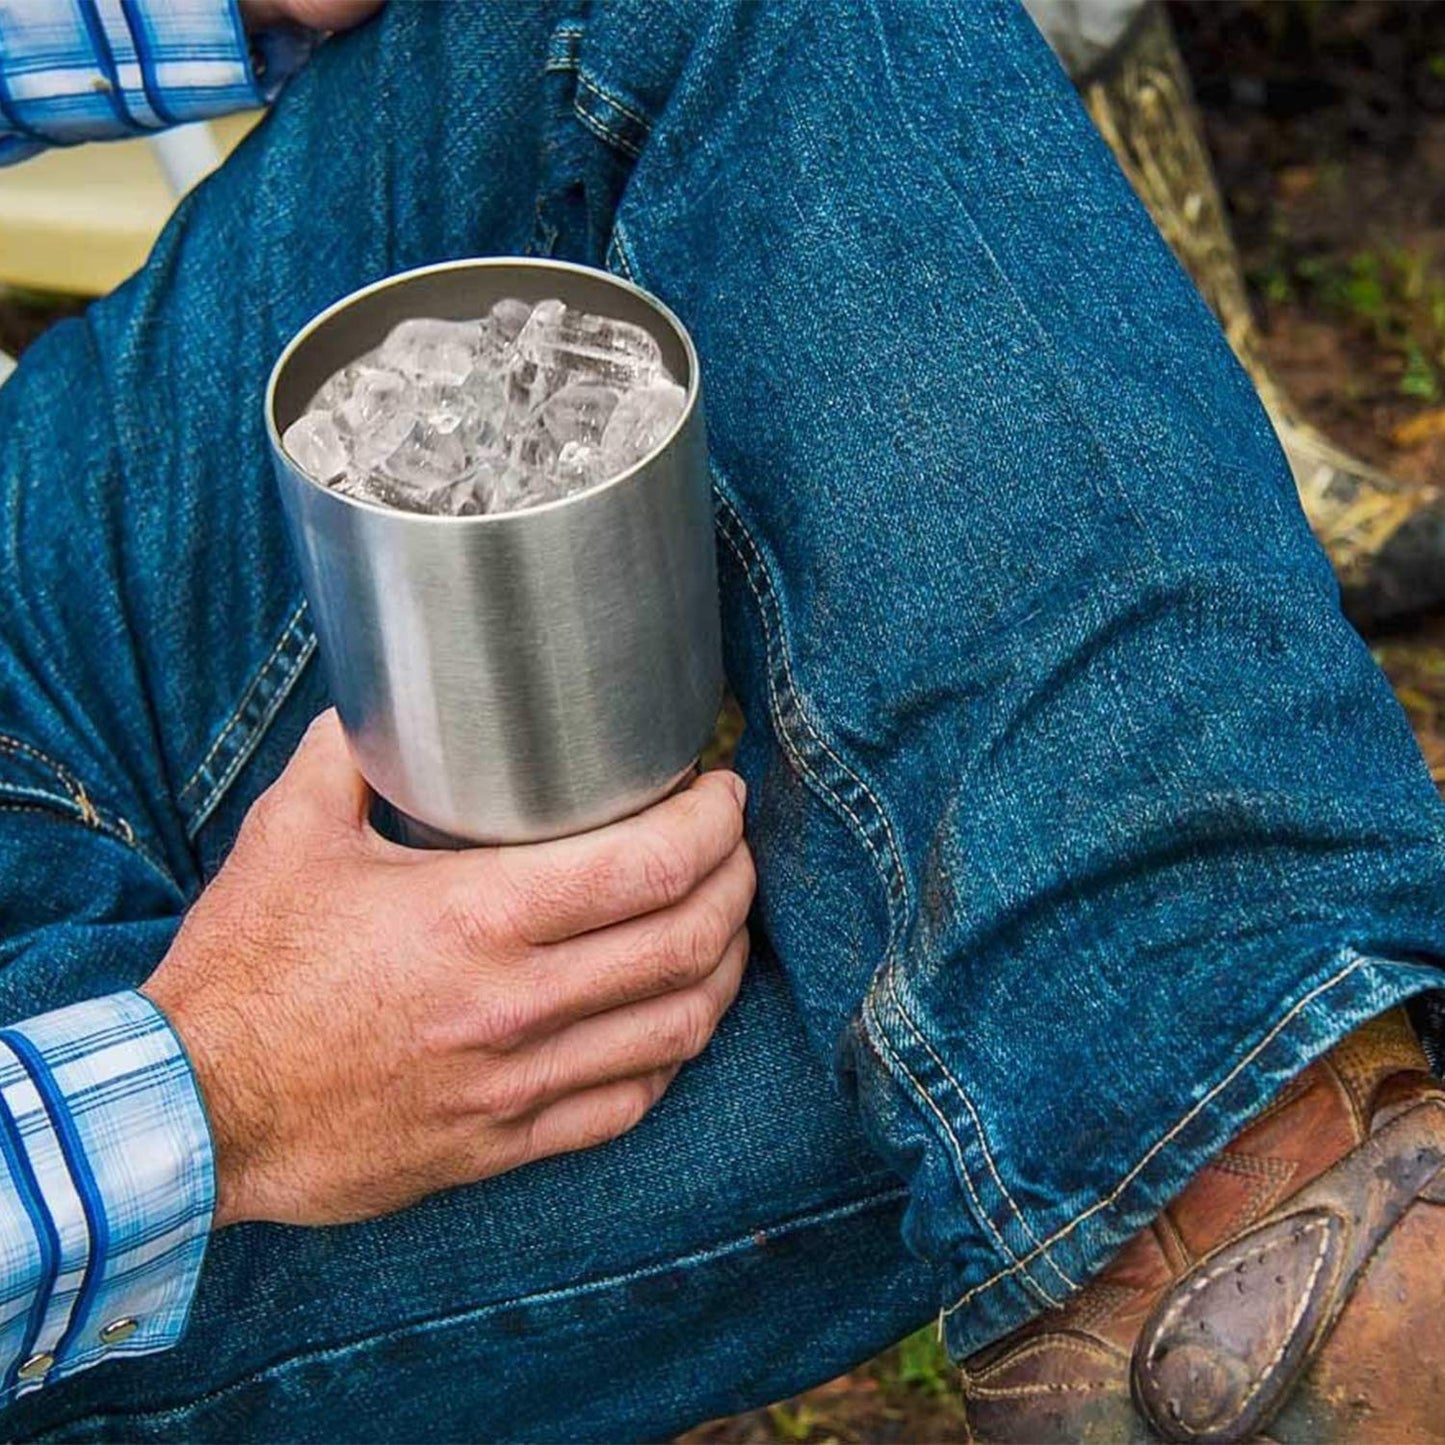 Stainless Steel Insulated Tumbler